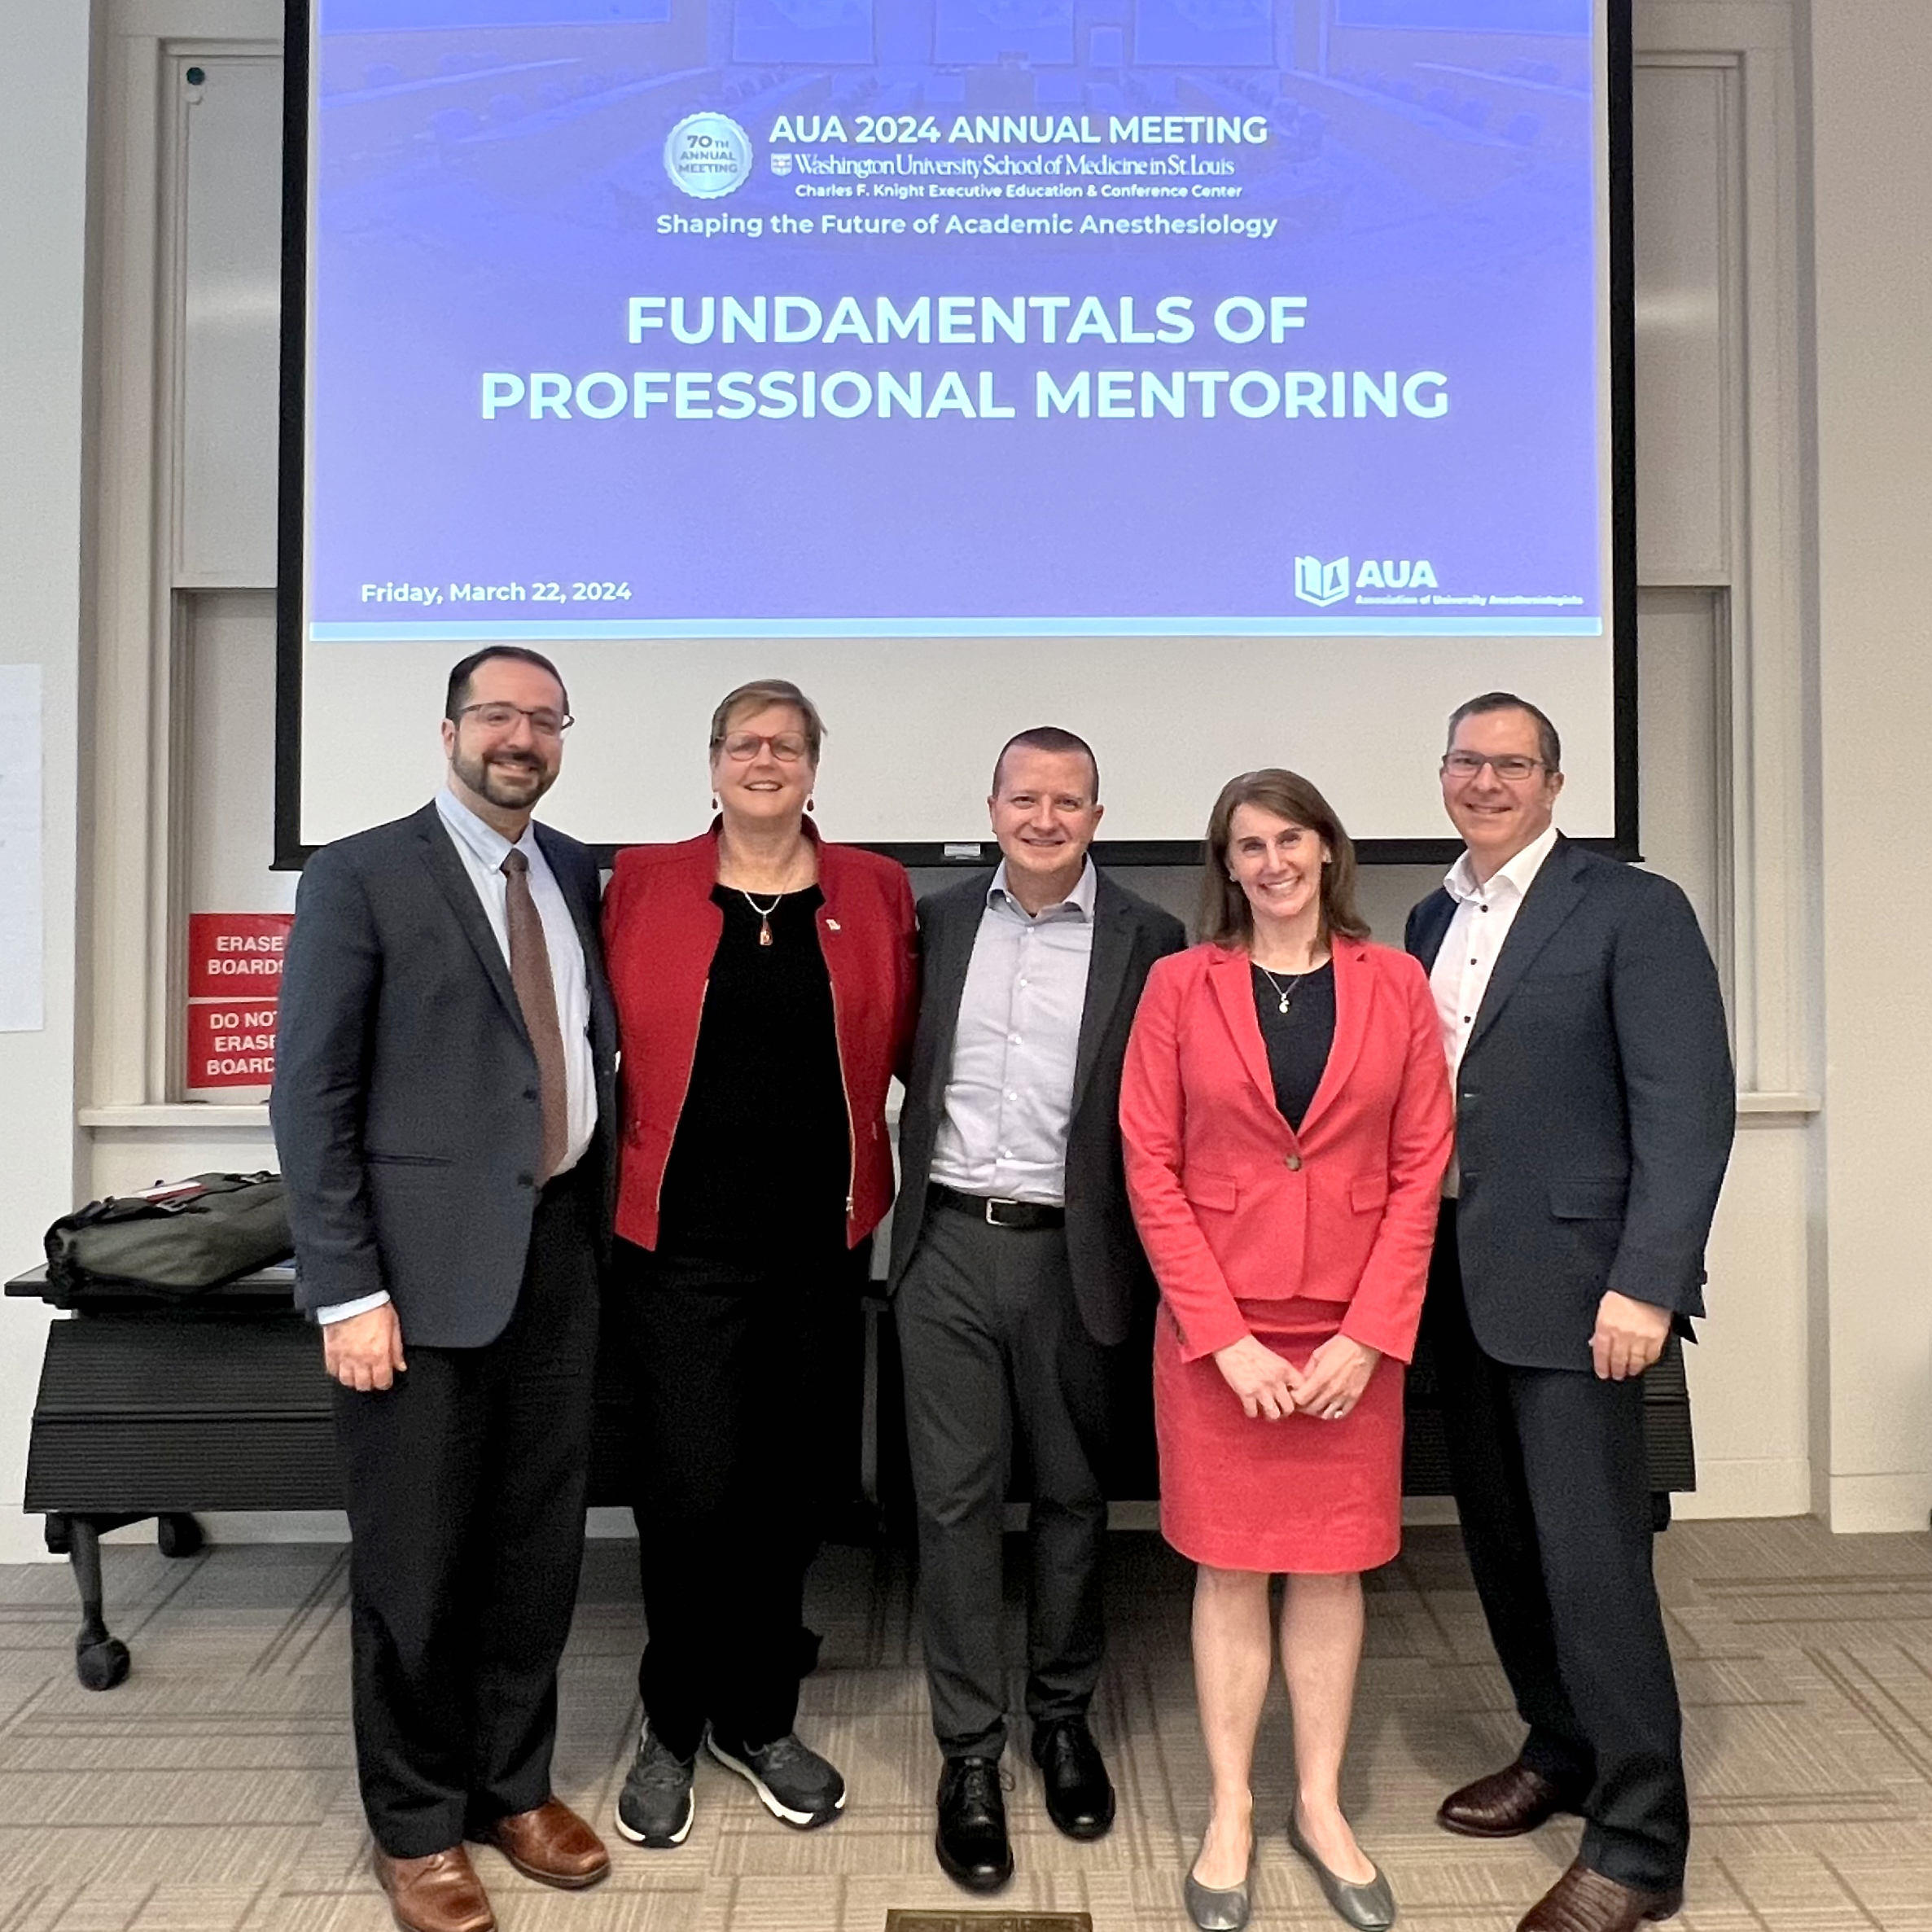 Dr. Hopf with the panel who spoke on fundamentals of professional mentoring.